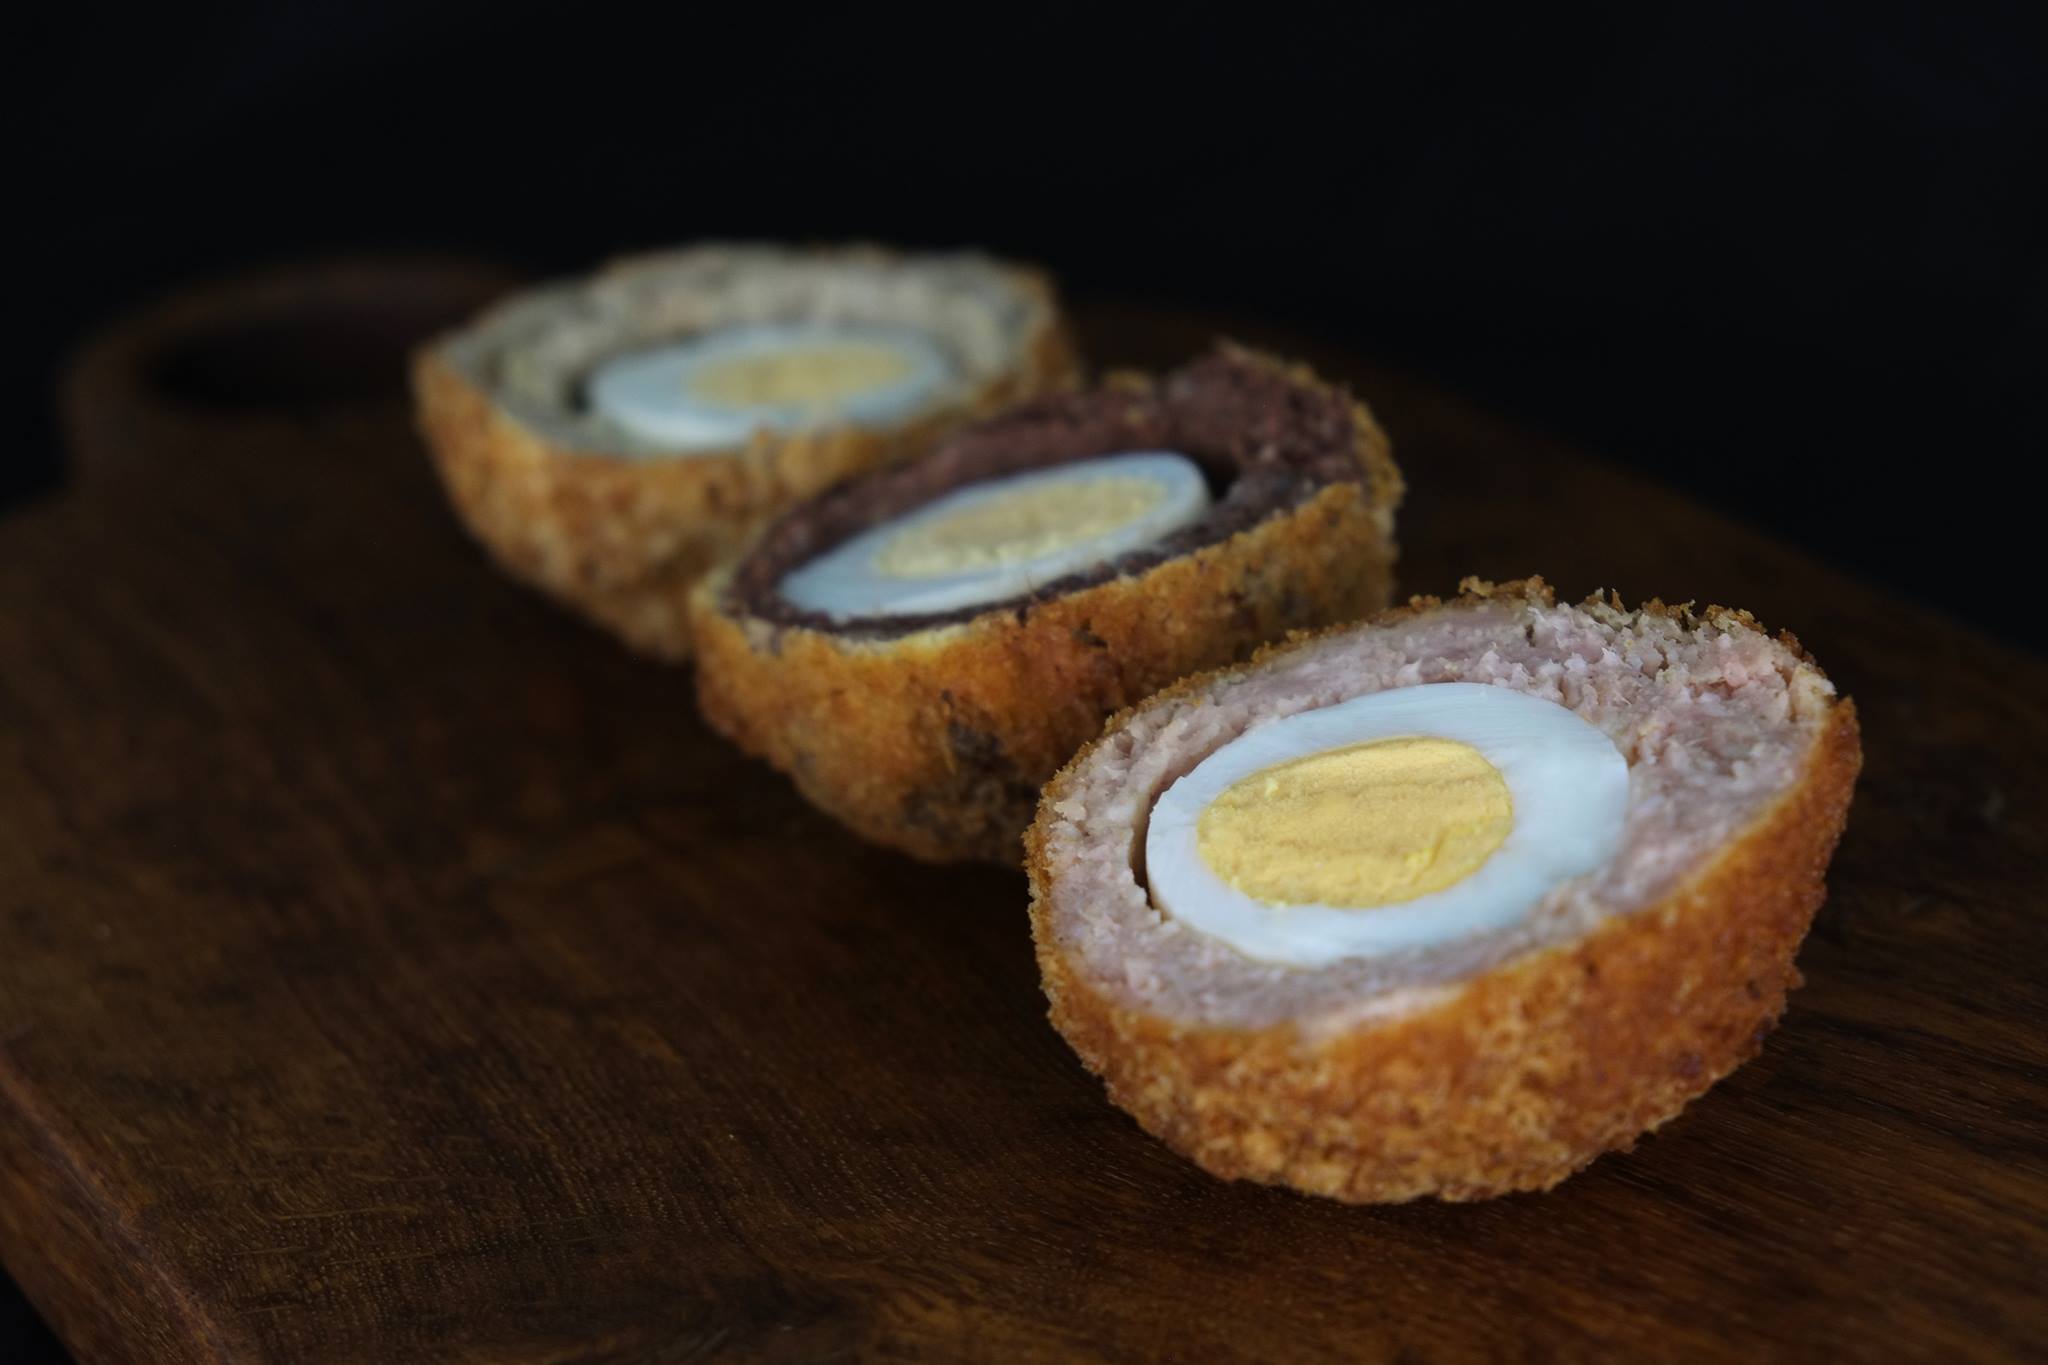 NEWS | It’s bad news for Scotch Egg fans as Prime Minister intervenes to say bar snacks DO NOT count as substantial meal